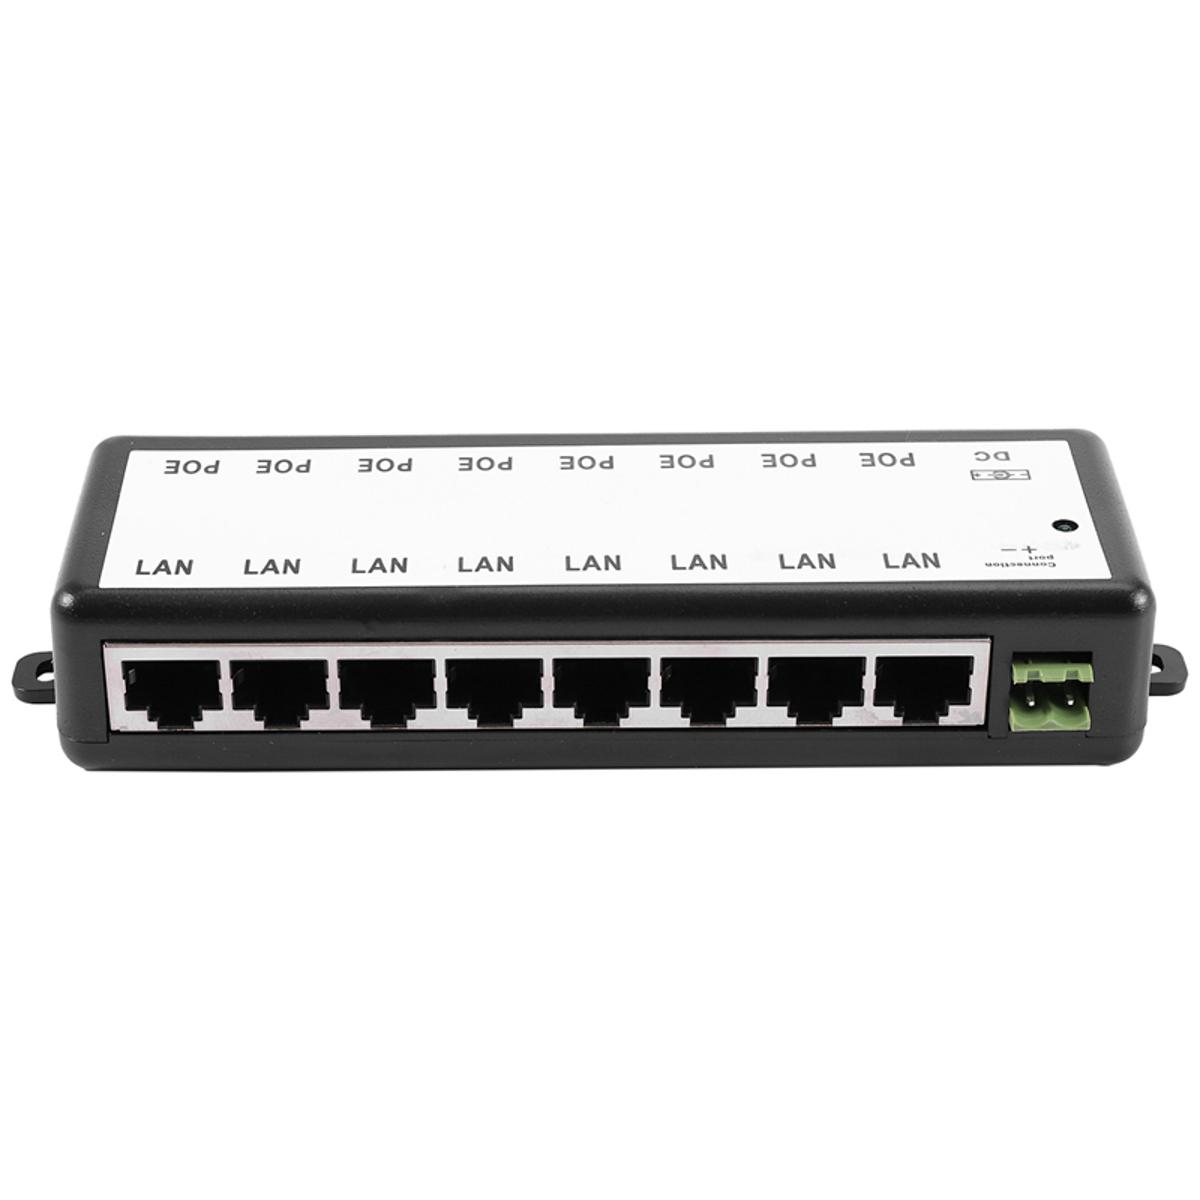 Wifi Soft 8 Port POE Injector - Buy Wifi Soft 8 Port POE Injector Online at  Low Price in India 